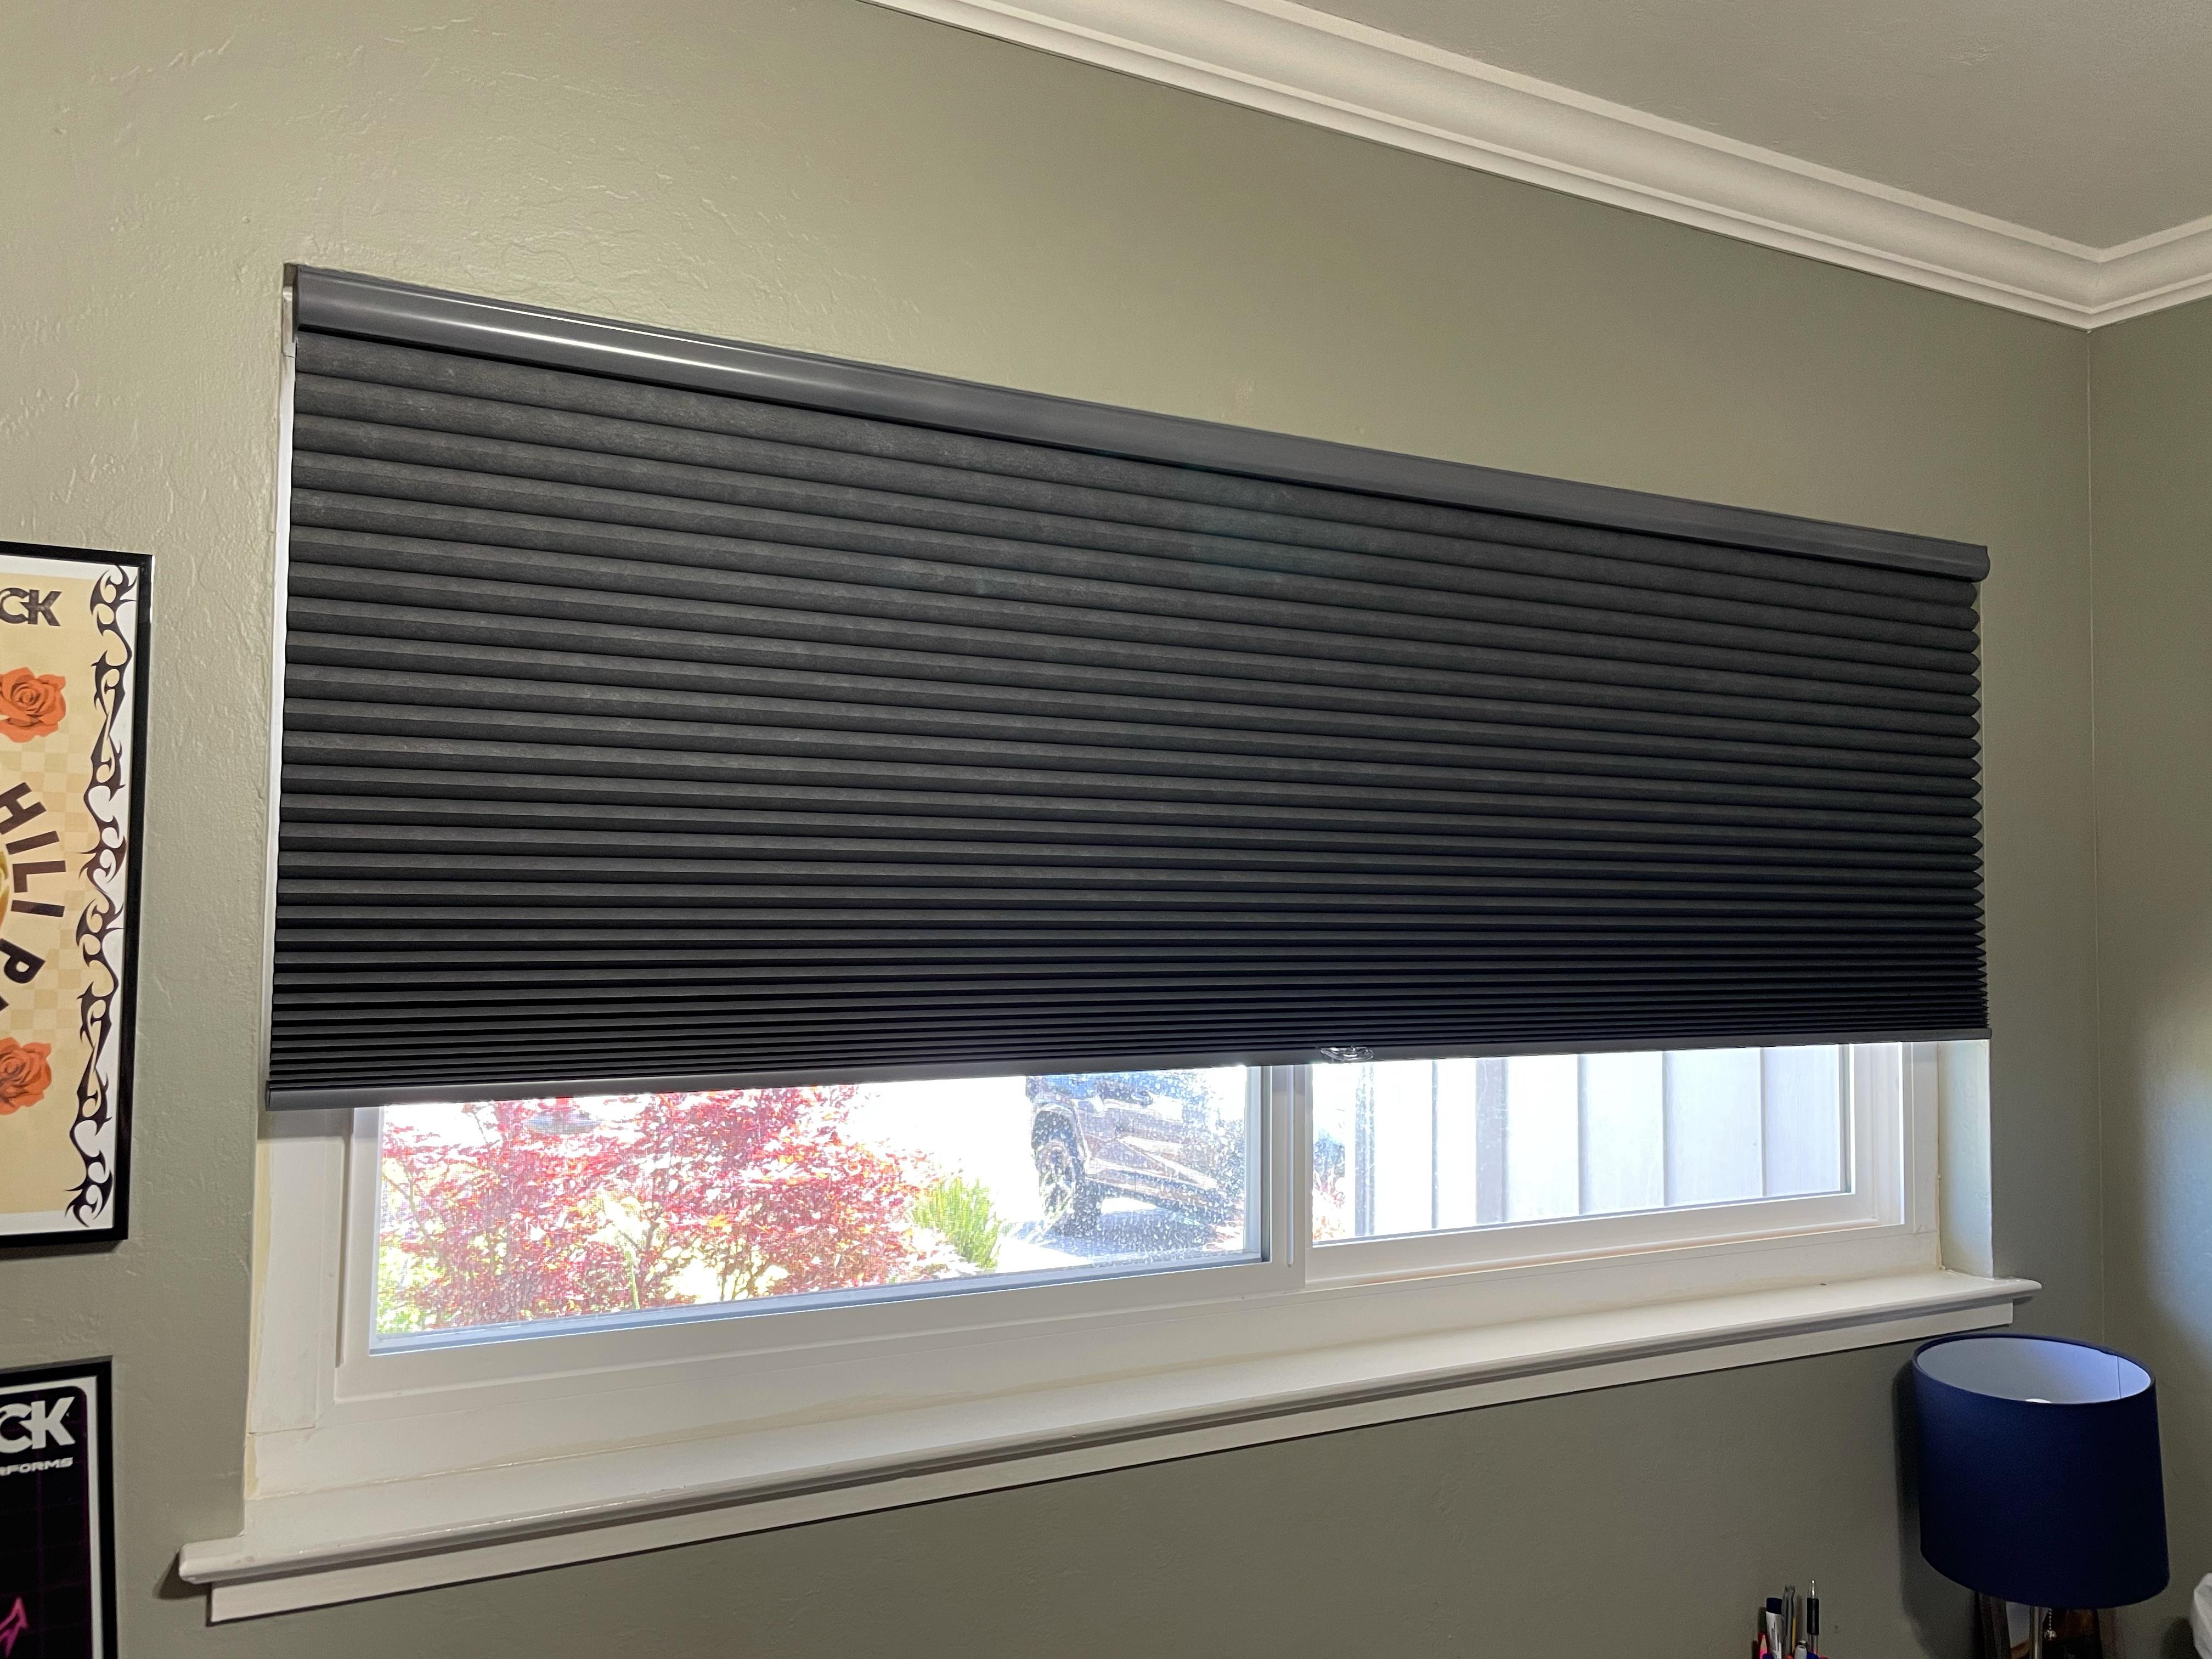 Get a break from the heat using our Cellular Shades. Budget Blinds of Los Gatos has exactly what you need to keep your home cool.  BudgetBlindsLosGatos  CellularShades  EnergyEfficientShades  ShadesOfBeauty  FreeConsultation  WindowWednesday